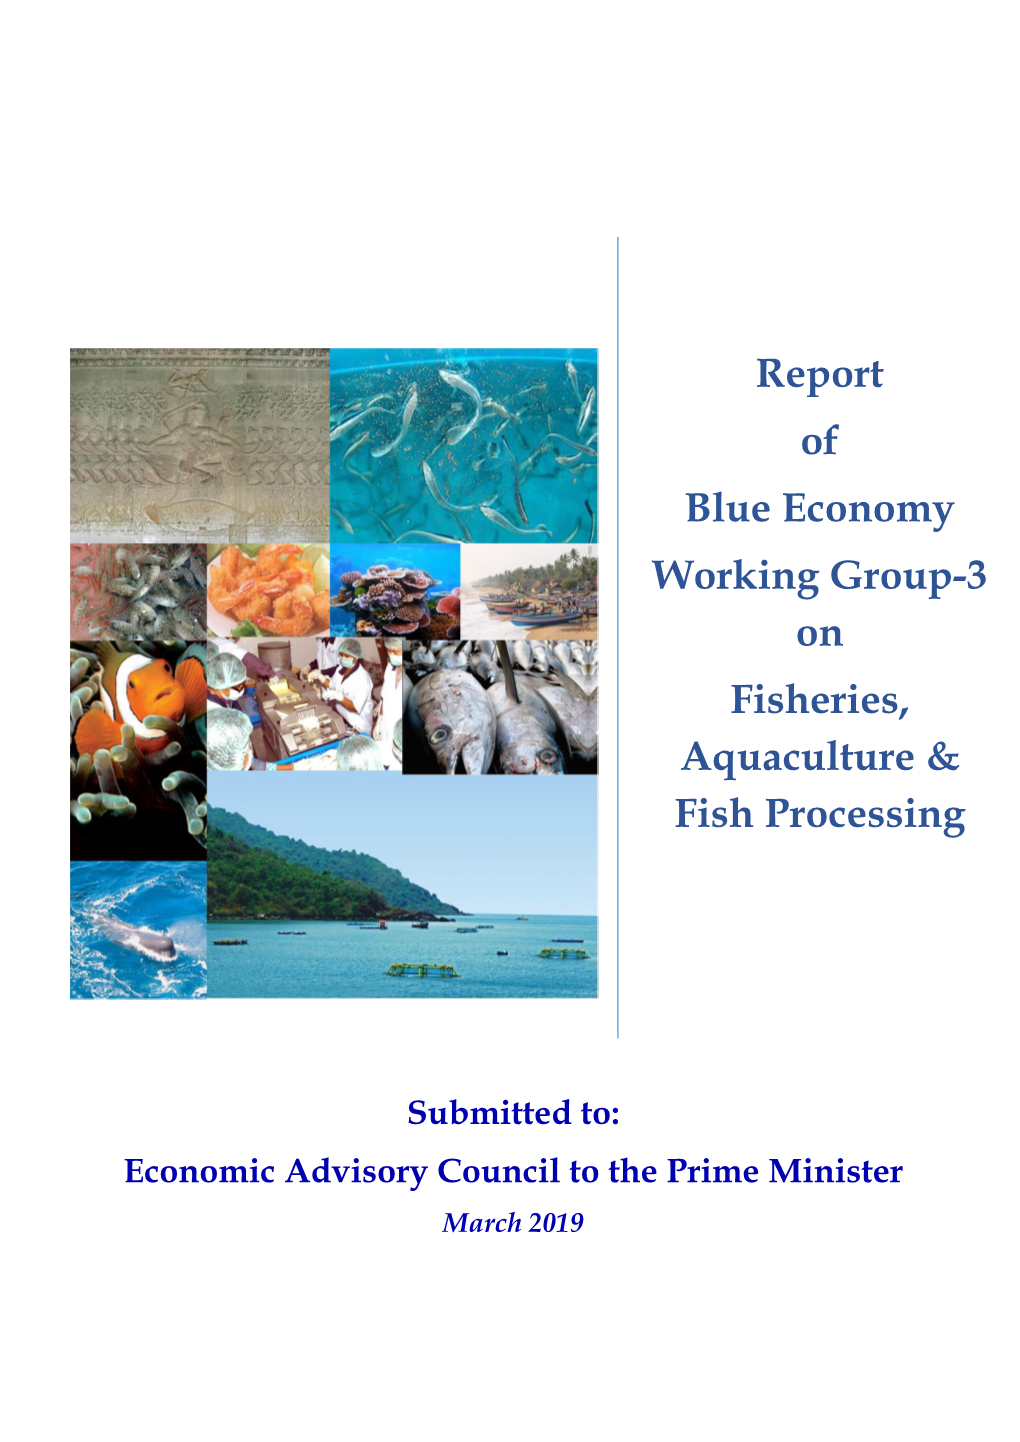 Report on Blue Economy: Fisheries, Aquaculture and Fish Processing